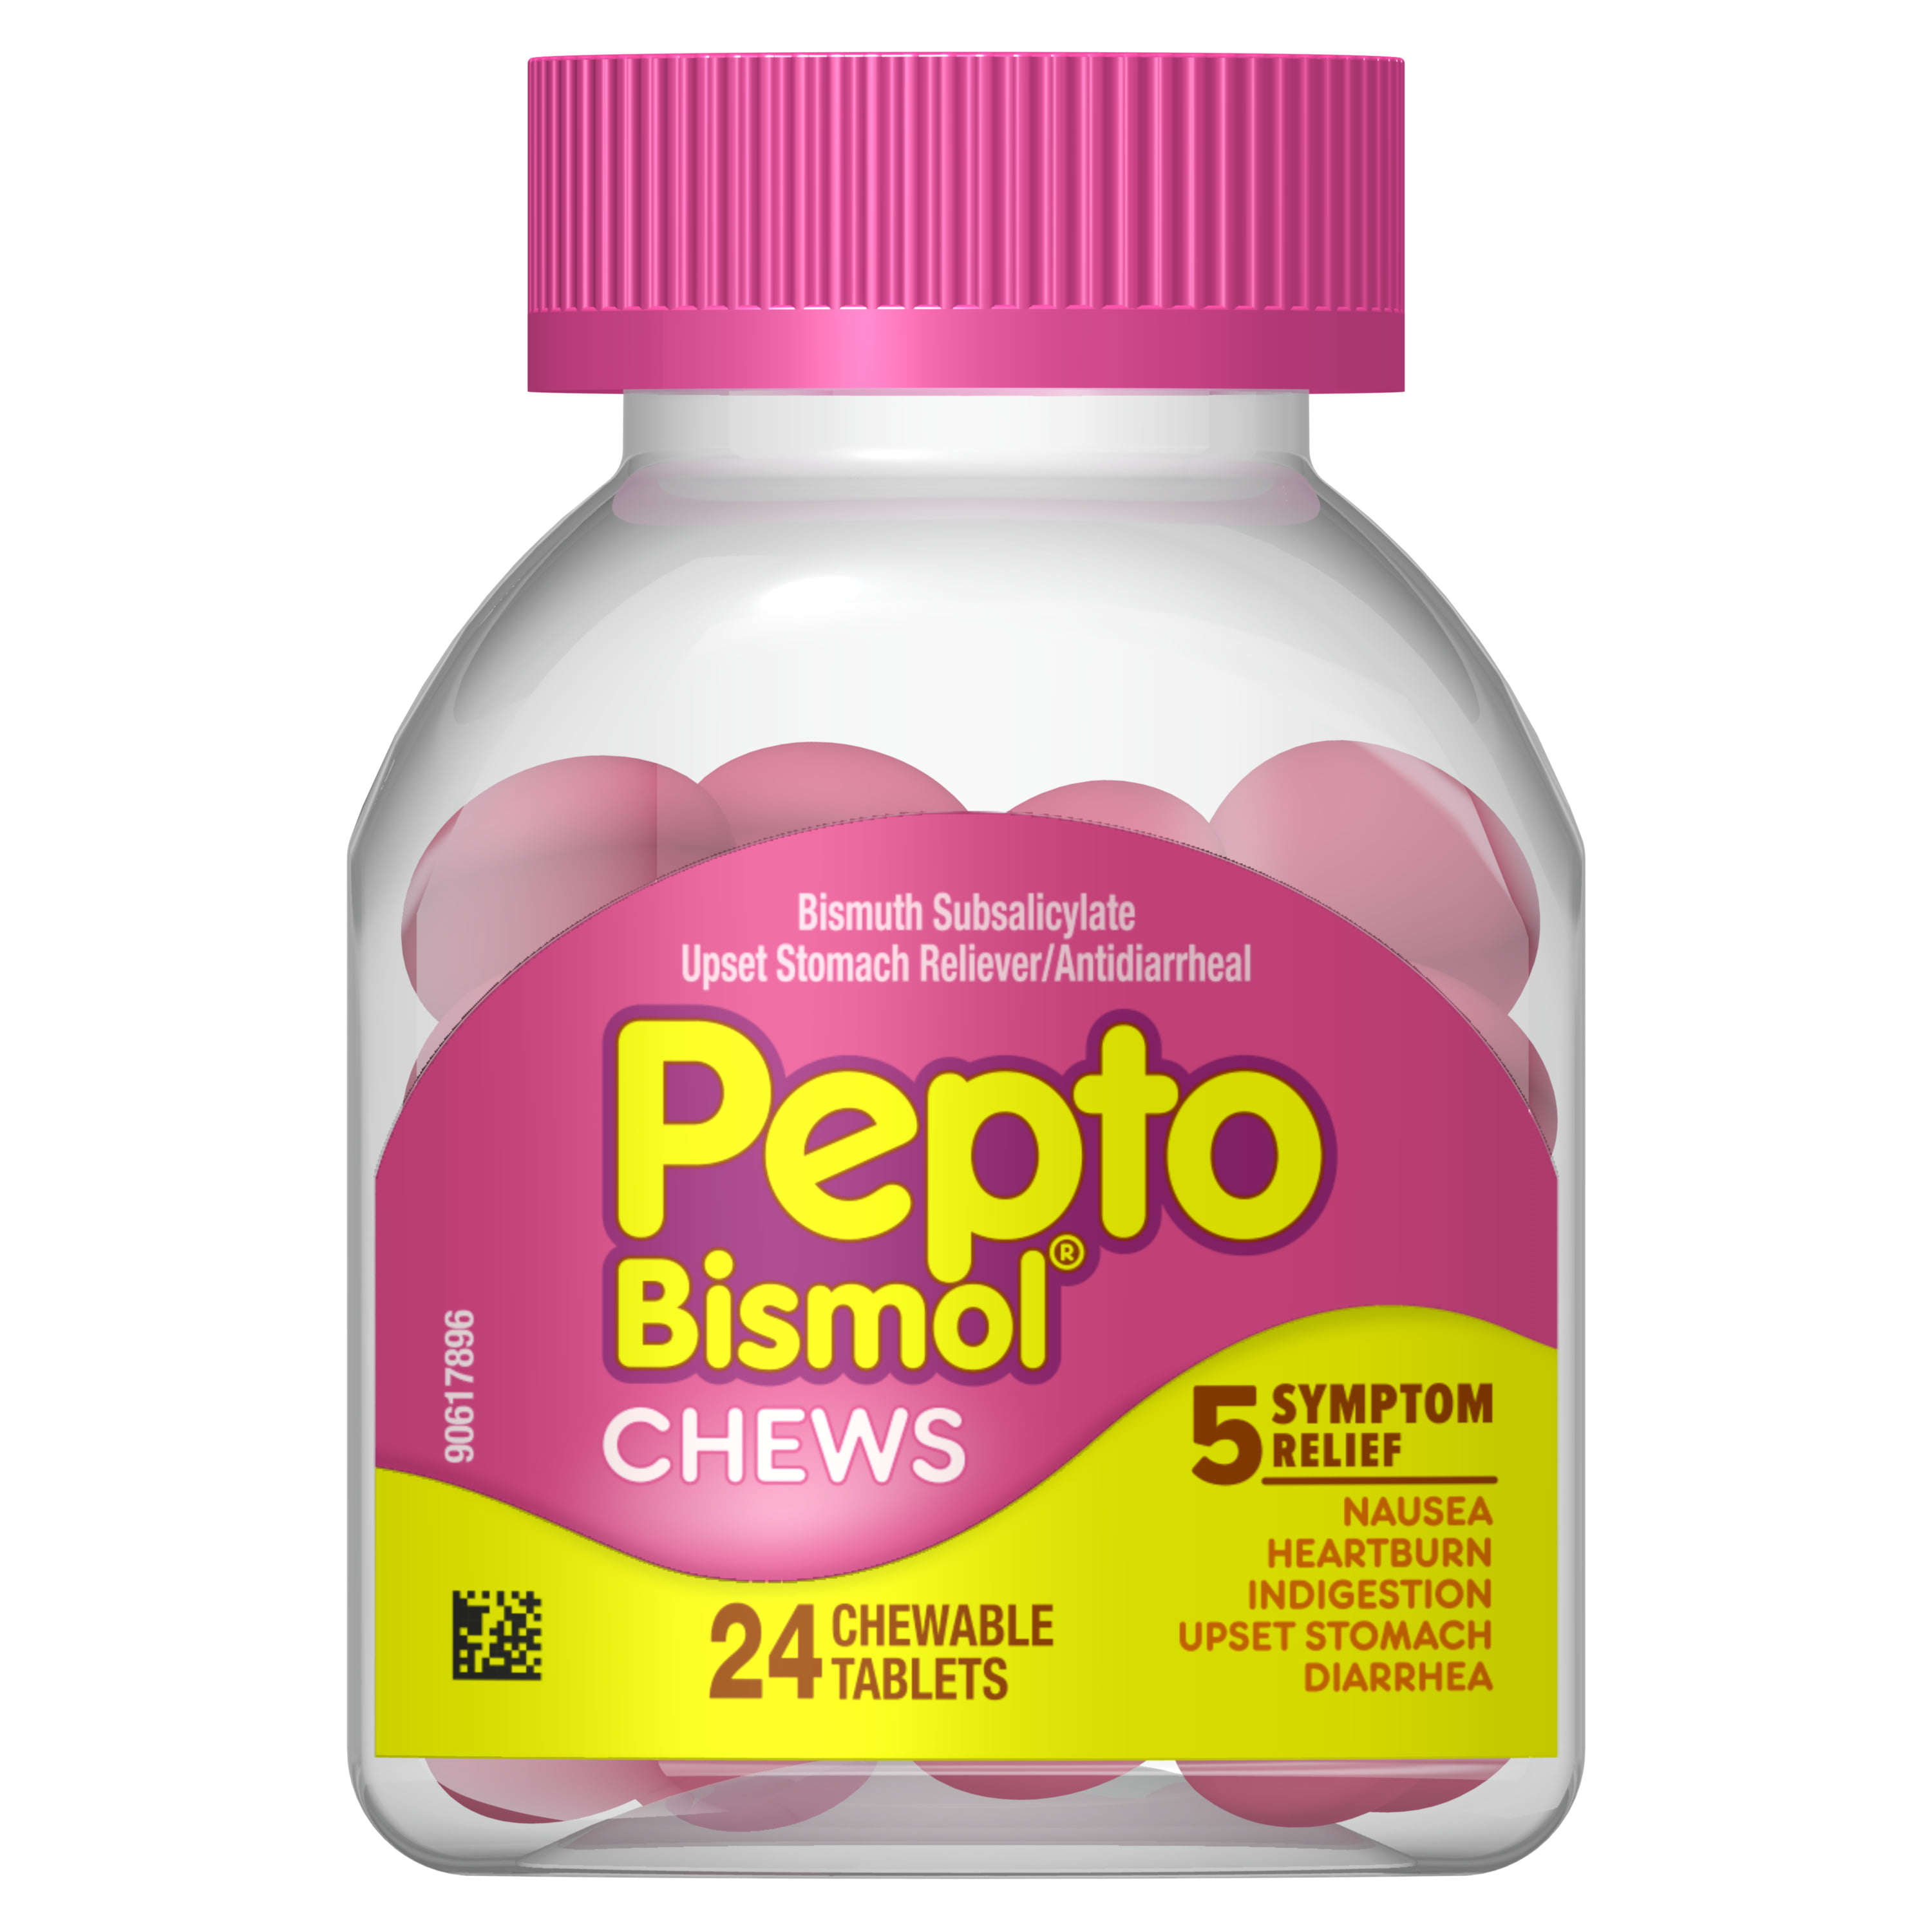 What is pepto bismol